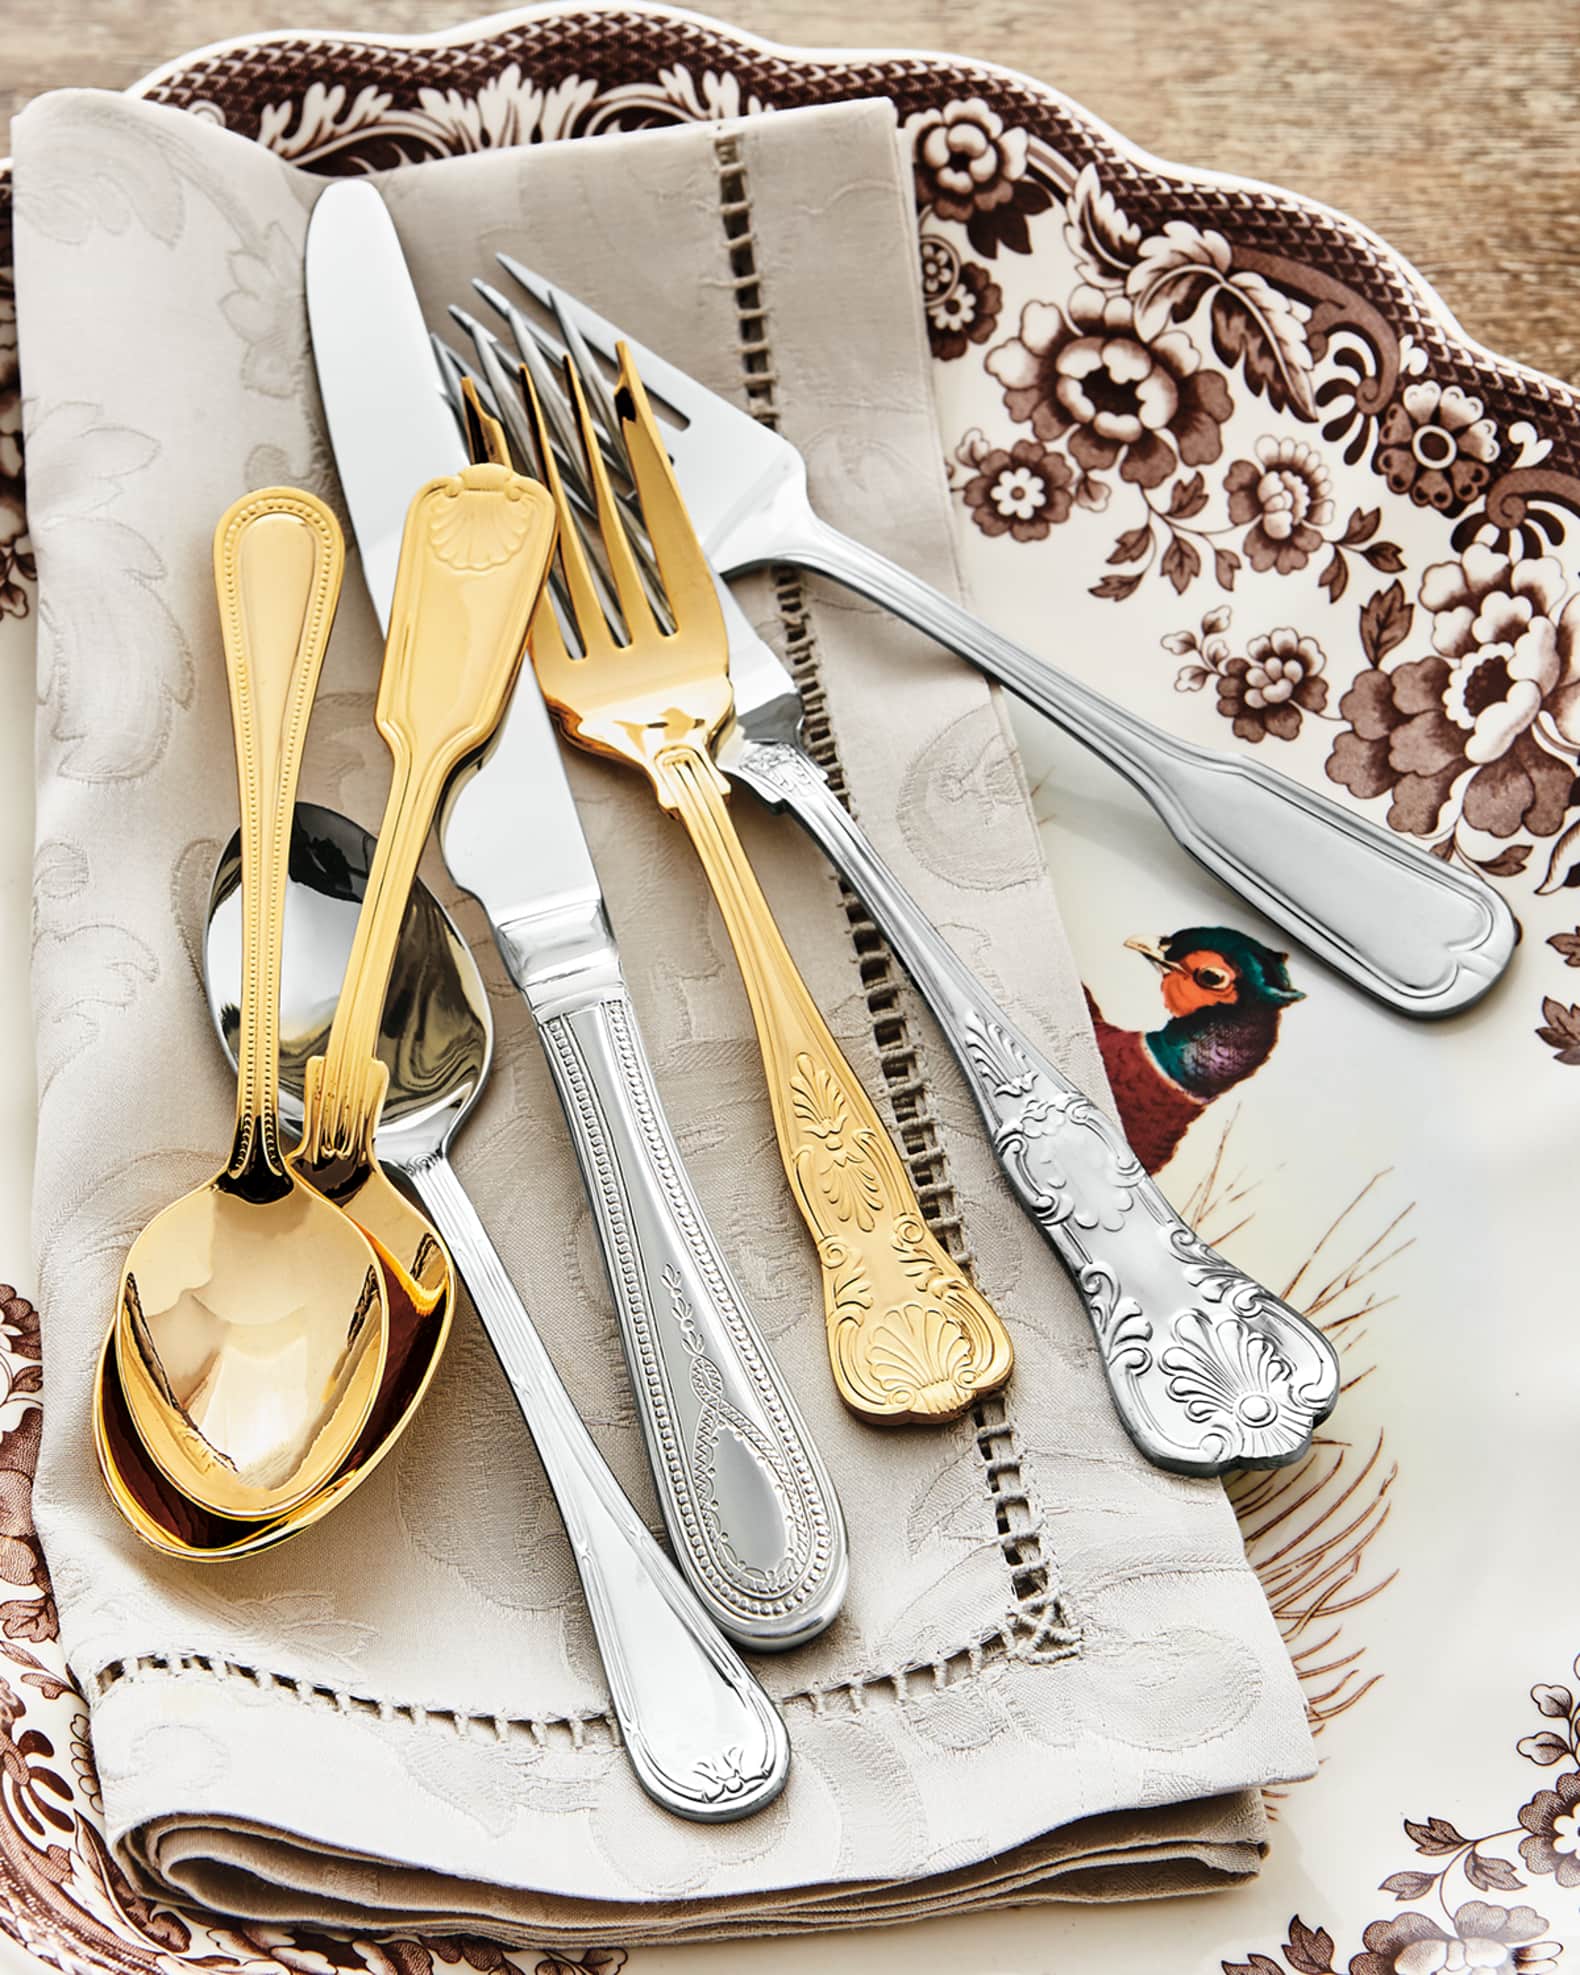 Towle Silversmiths 90-Piece Gold-Plated Hotel Flatware Service